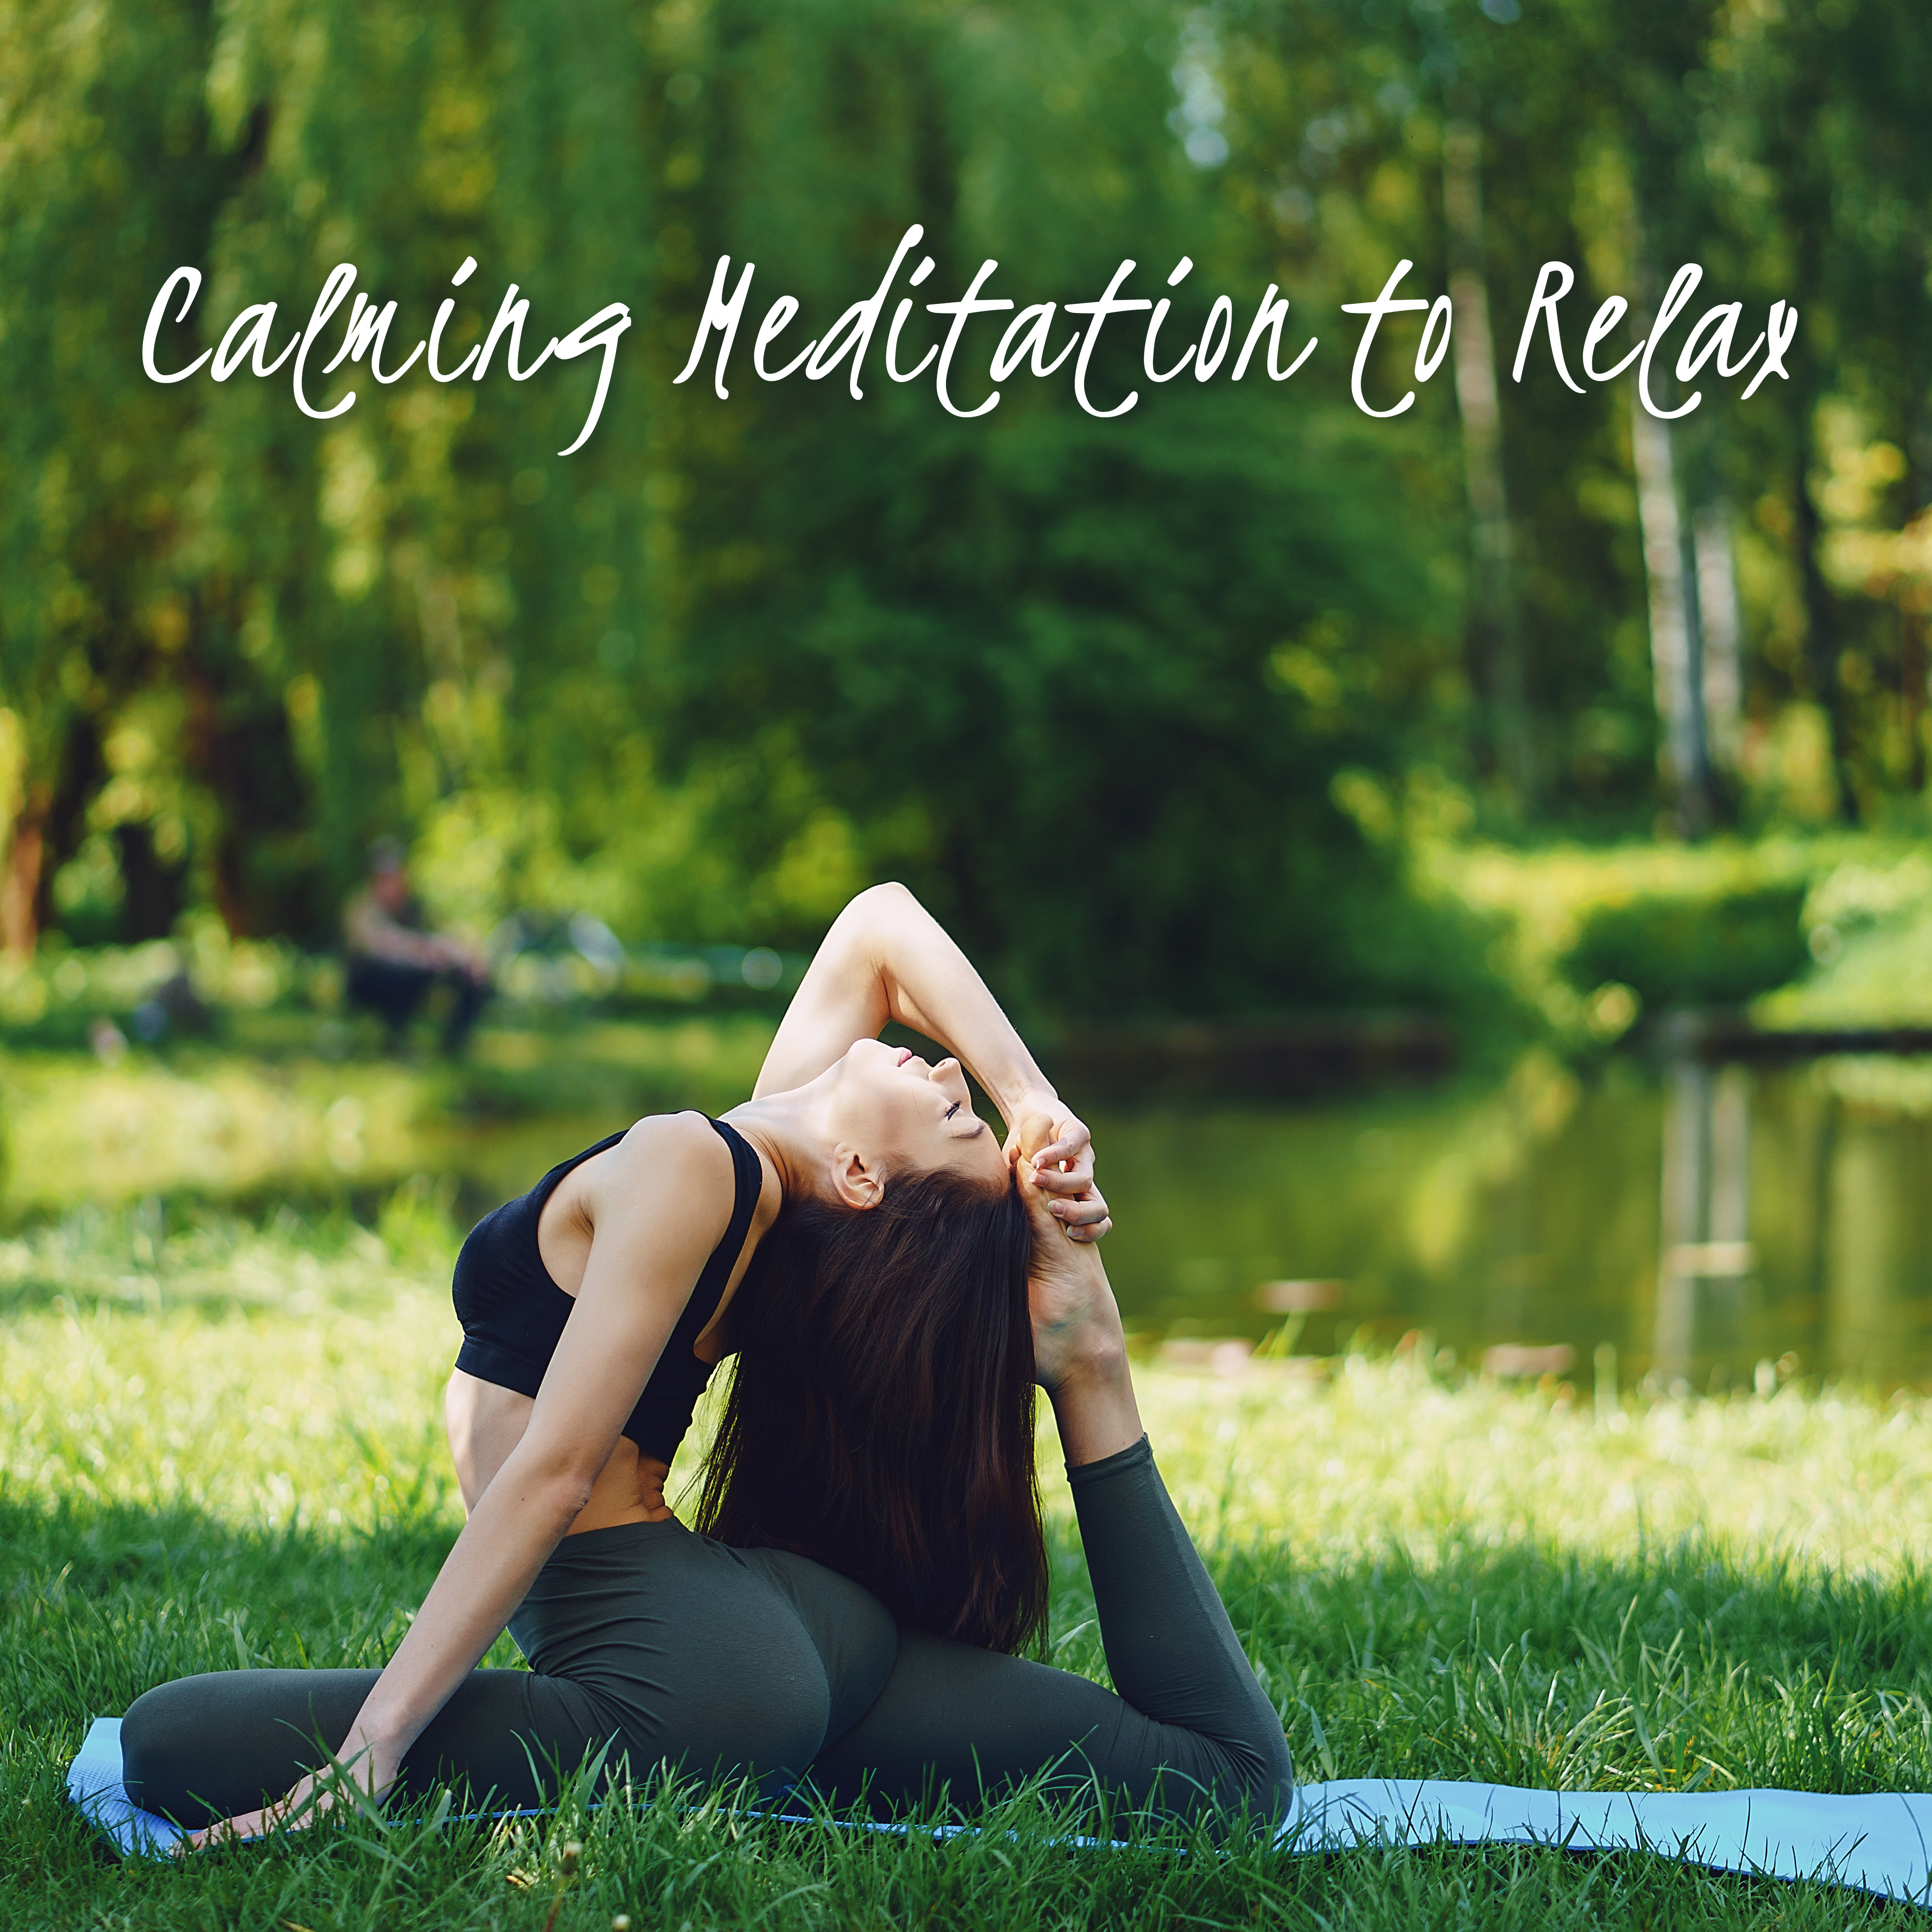 Calming Meditation to Relax